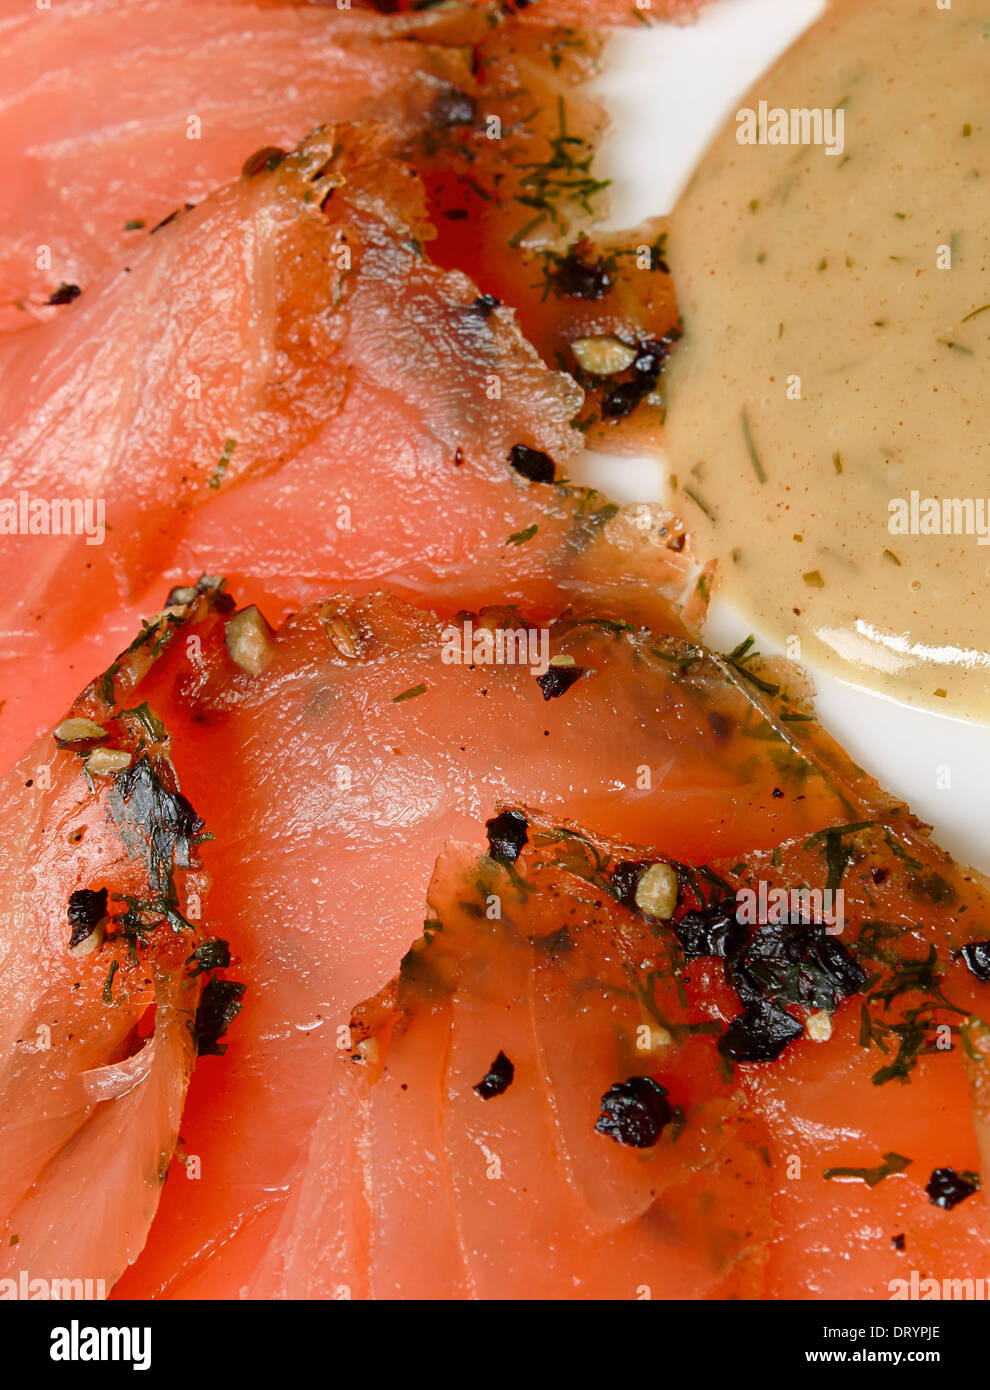 Gravlax salmon slices served with a mustard and dill sauce. Stock Photo